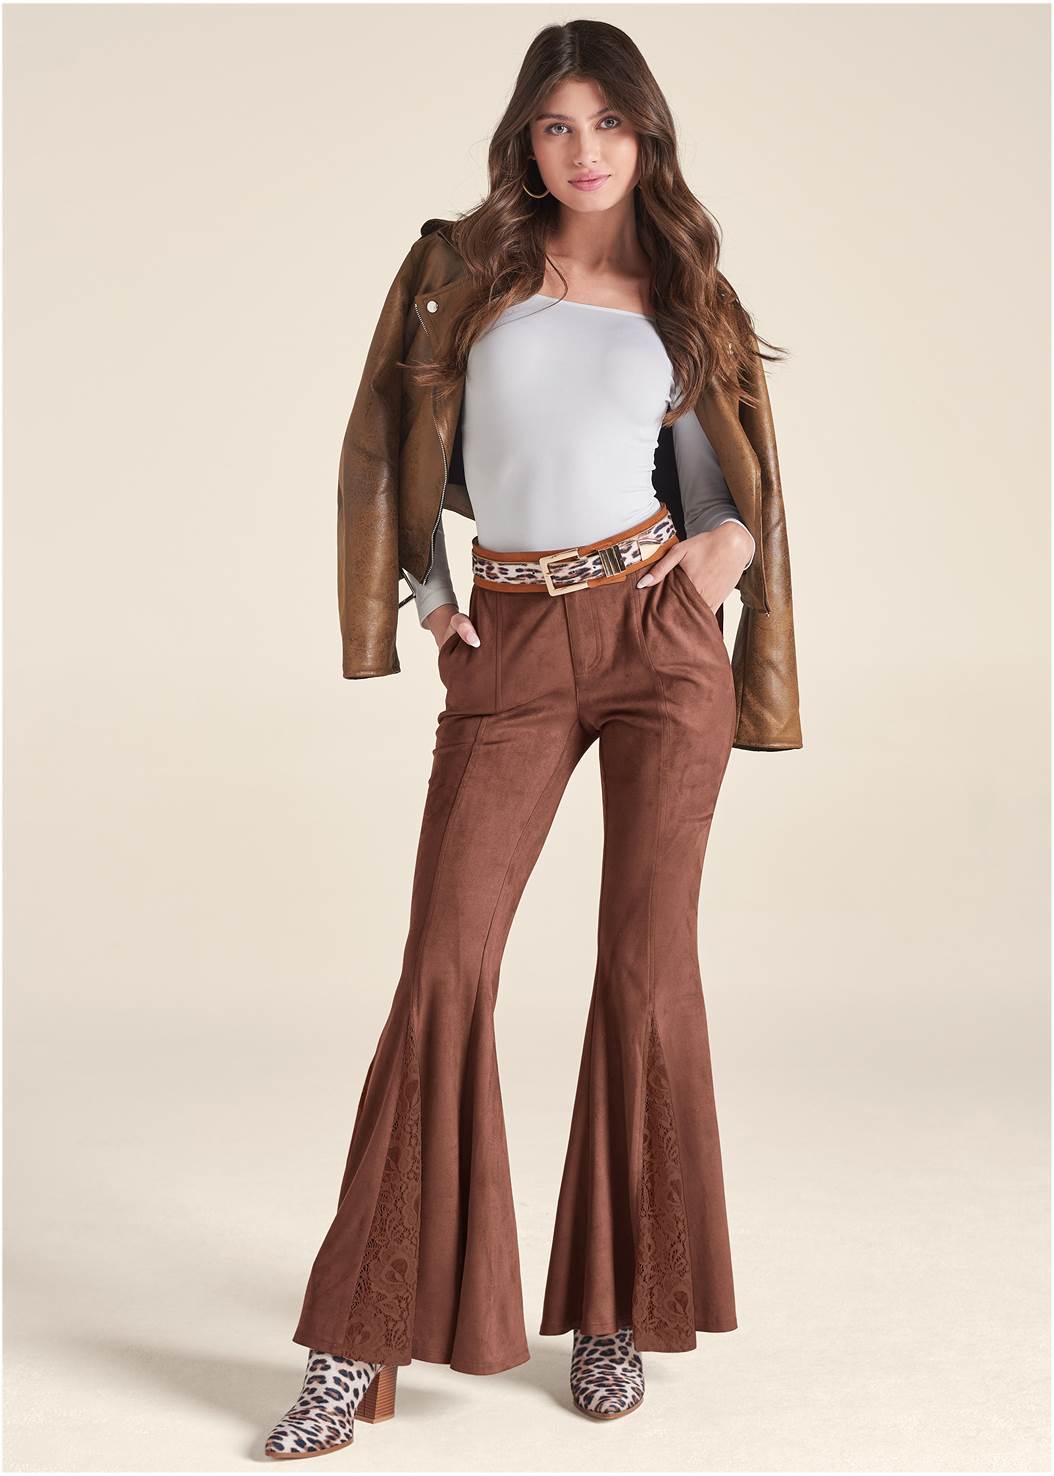 FAUX-SUEDE FLARE PANTS in Brown Multi